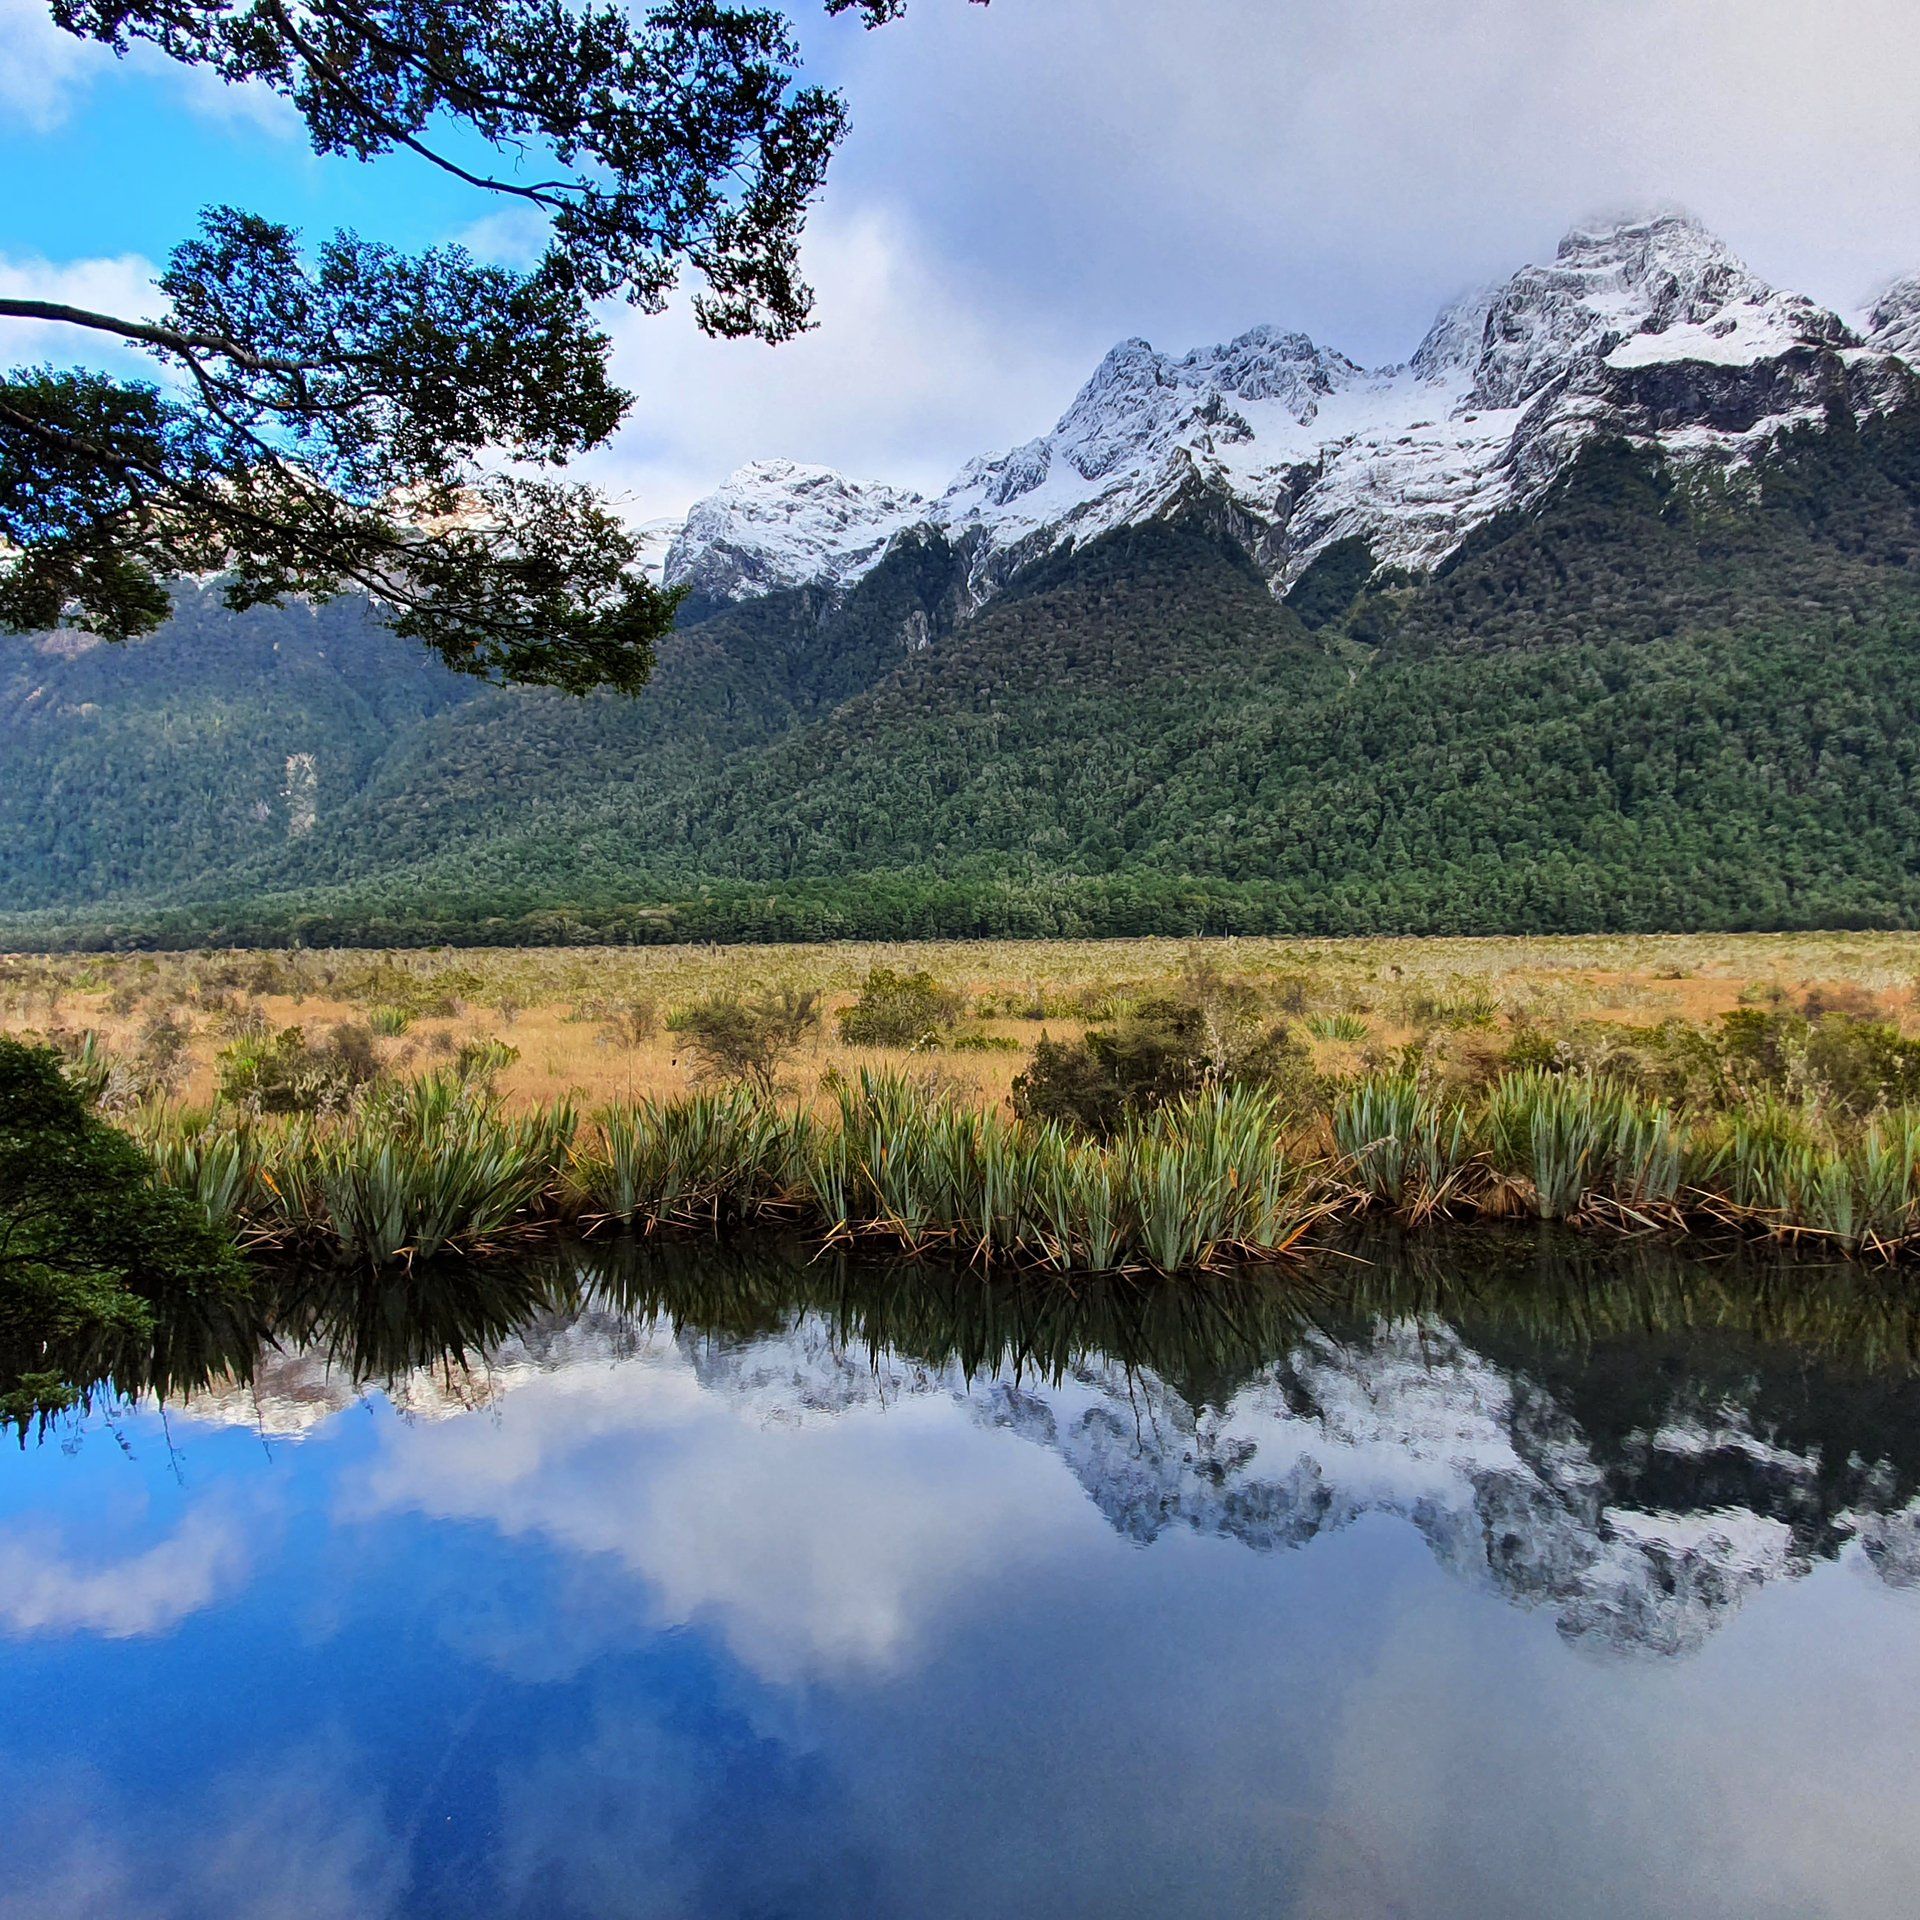 Scenic views from the Sir Edmund Hillary Explorer train and coach tours